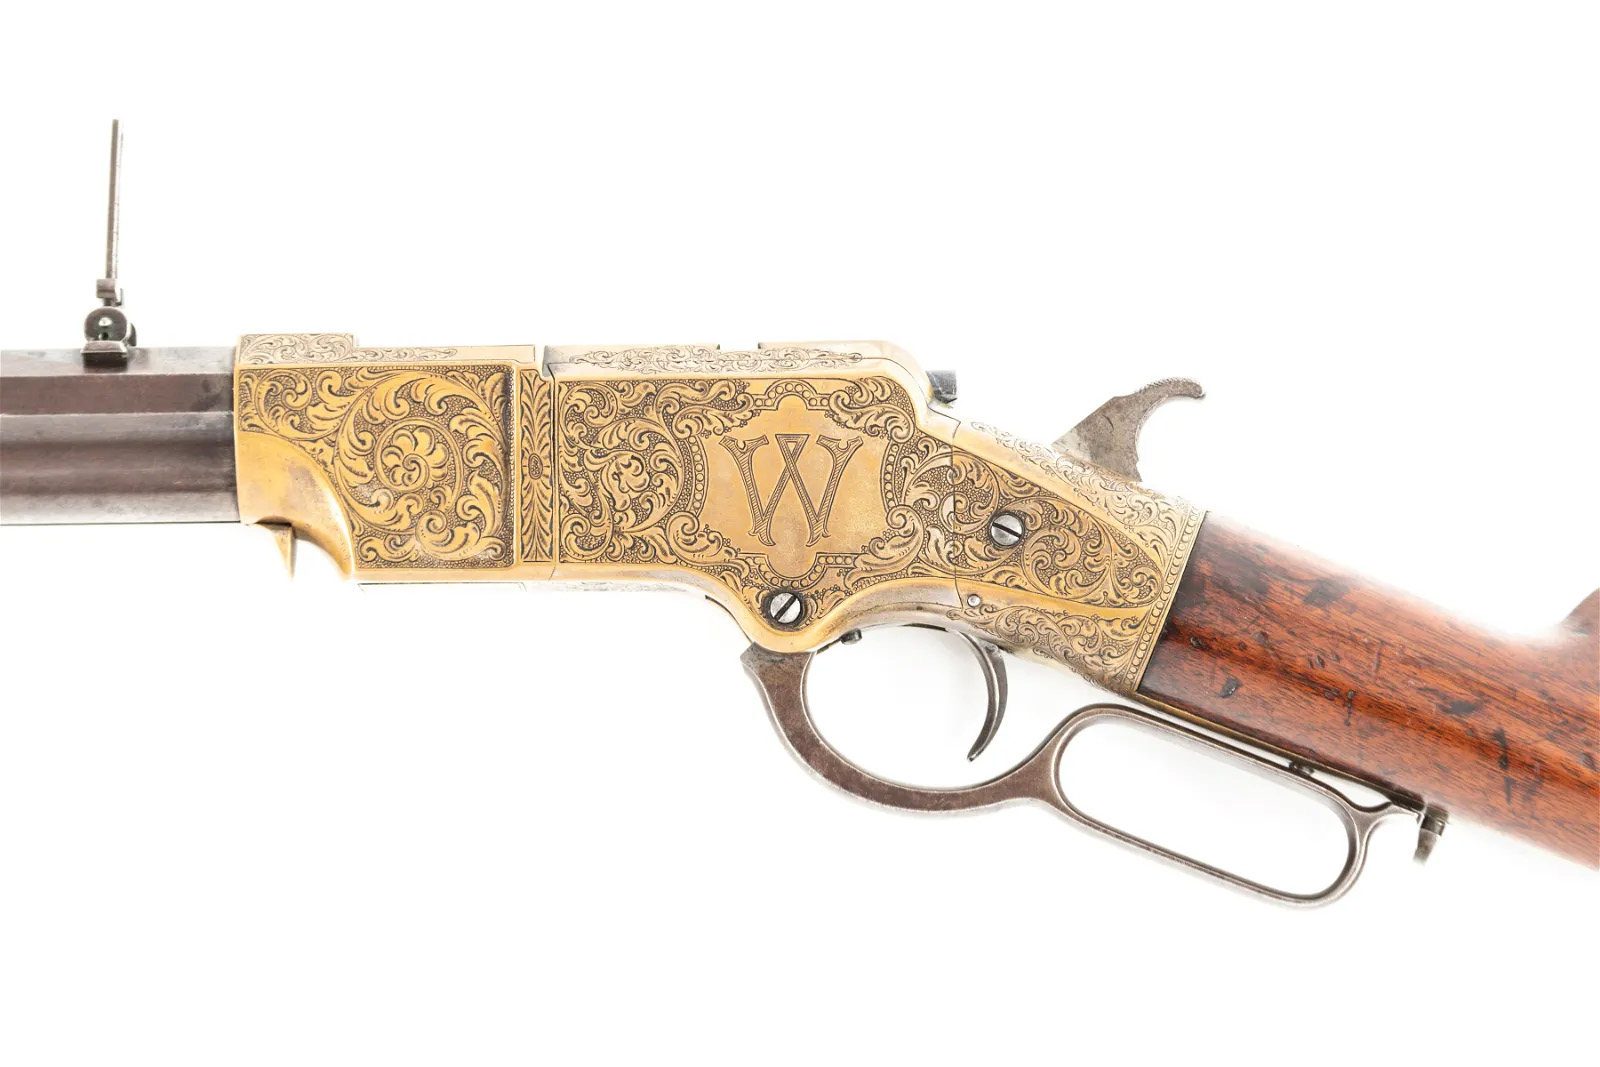 1862 Henry .44 caliber rifle with possible Winchester connection topped $155K at A&#038;S